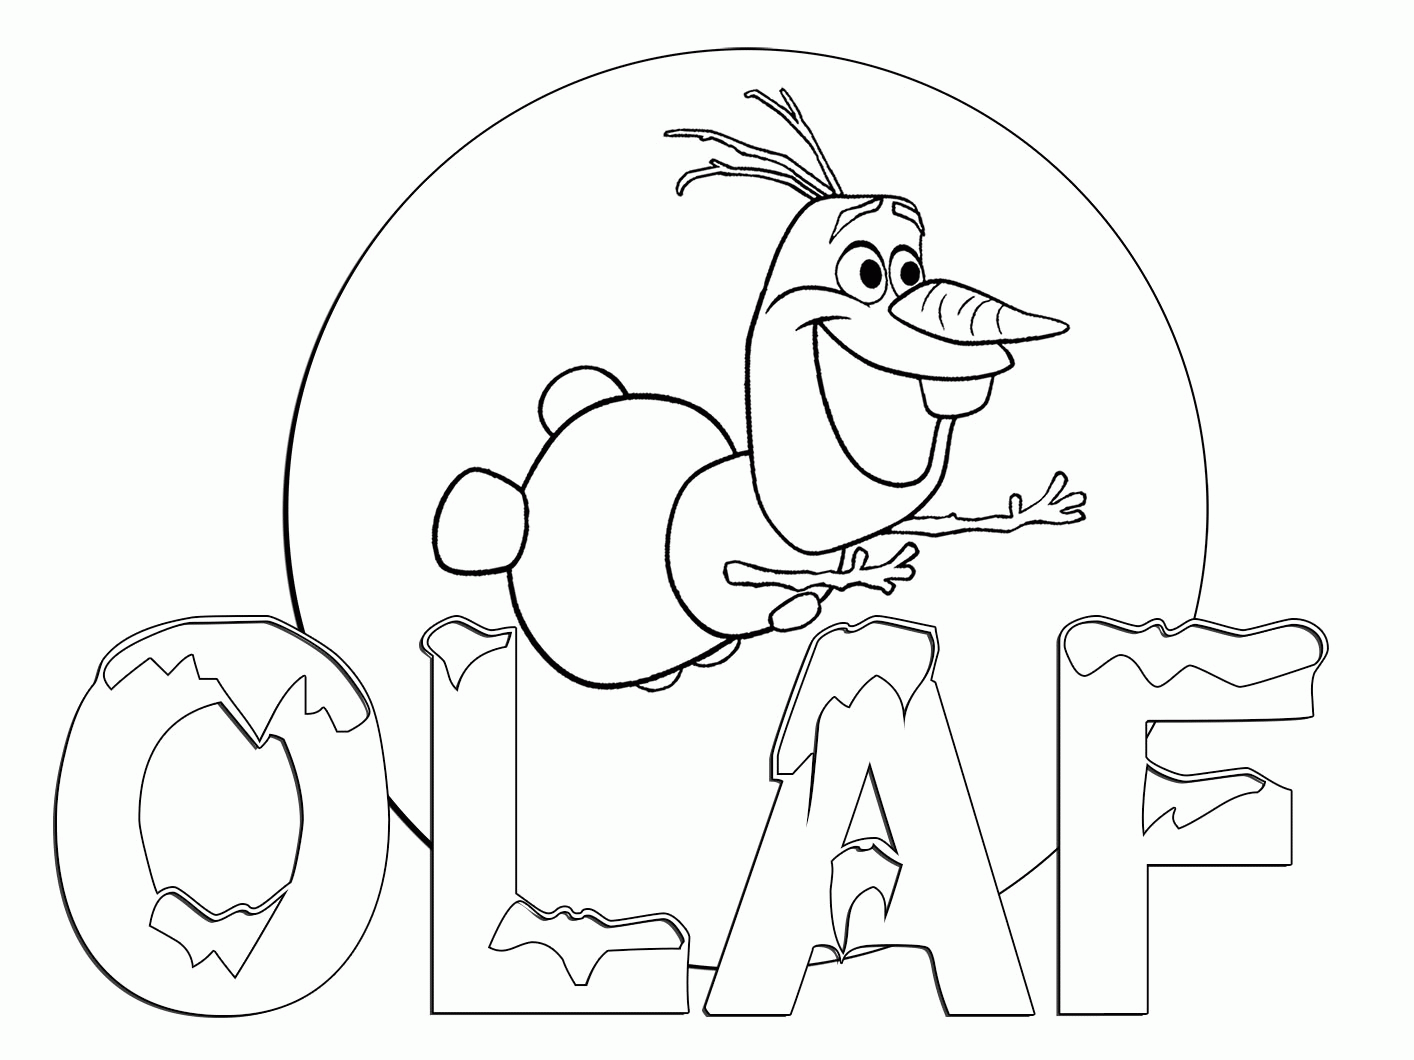 Frozen Coloring Pages | Frozen Coloring book - Coloring Point ...